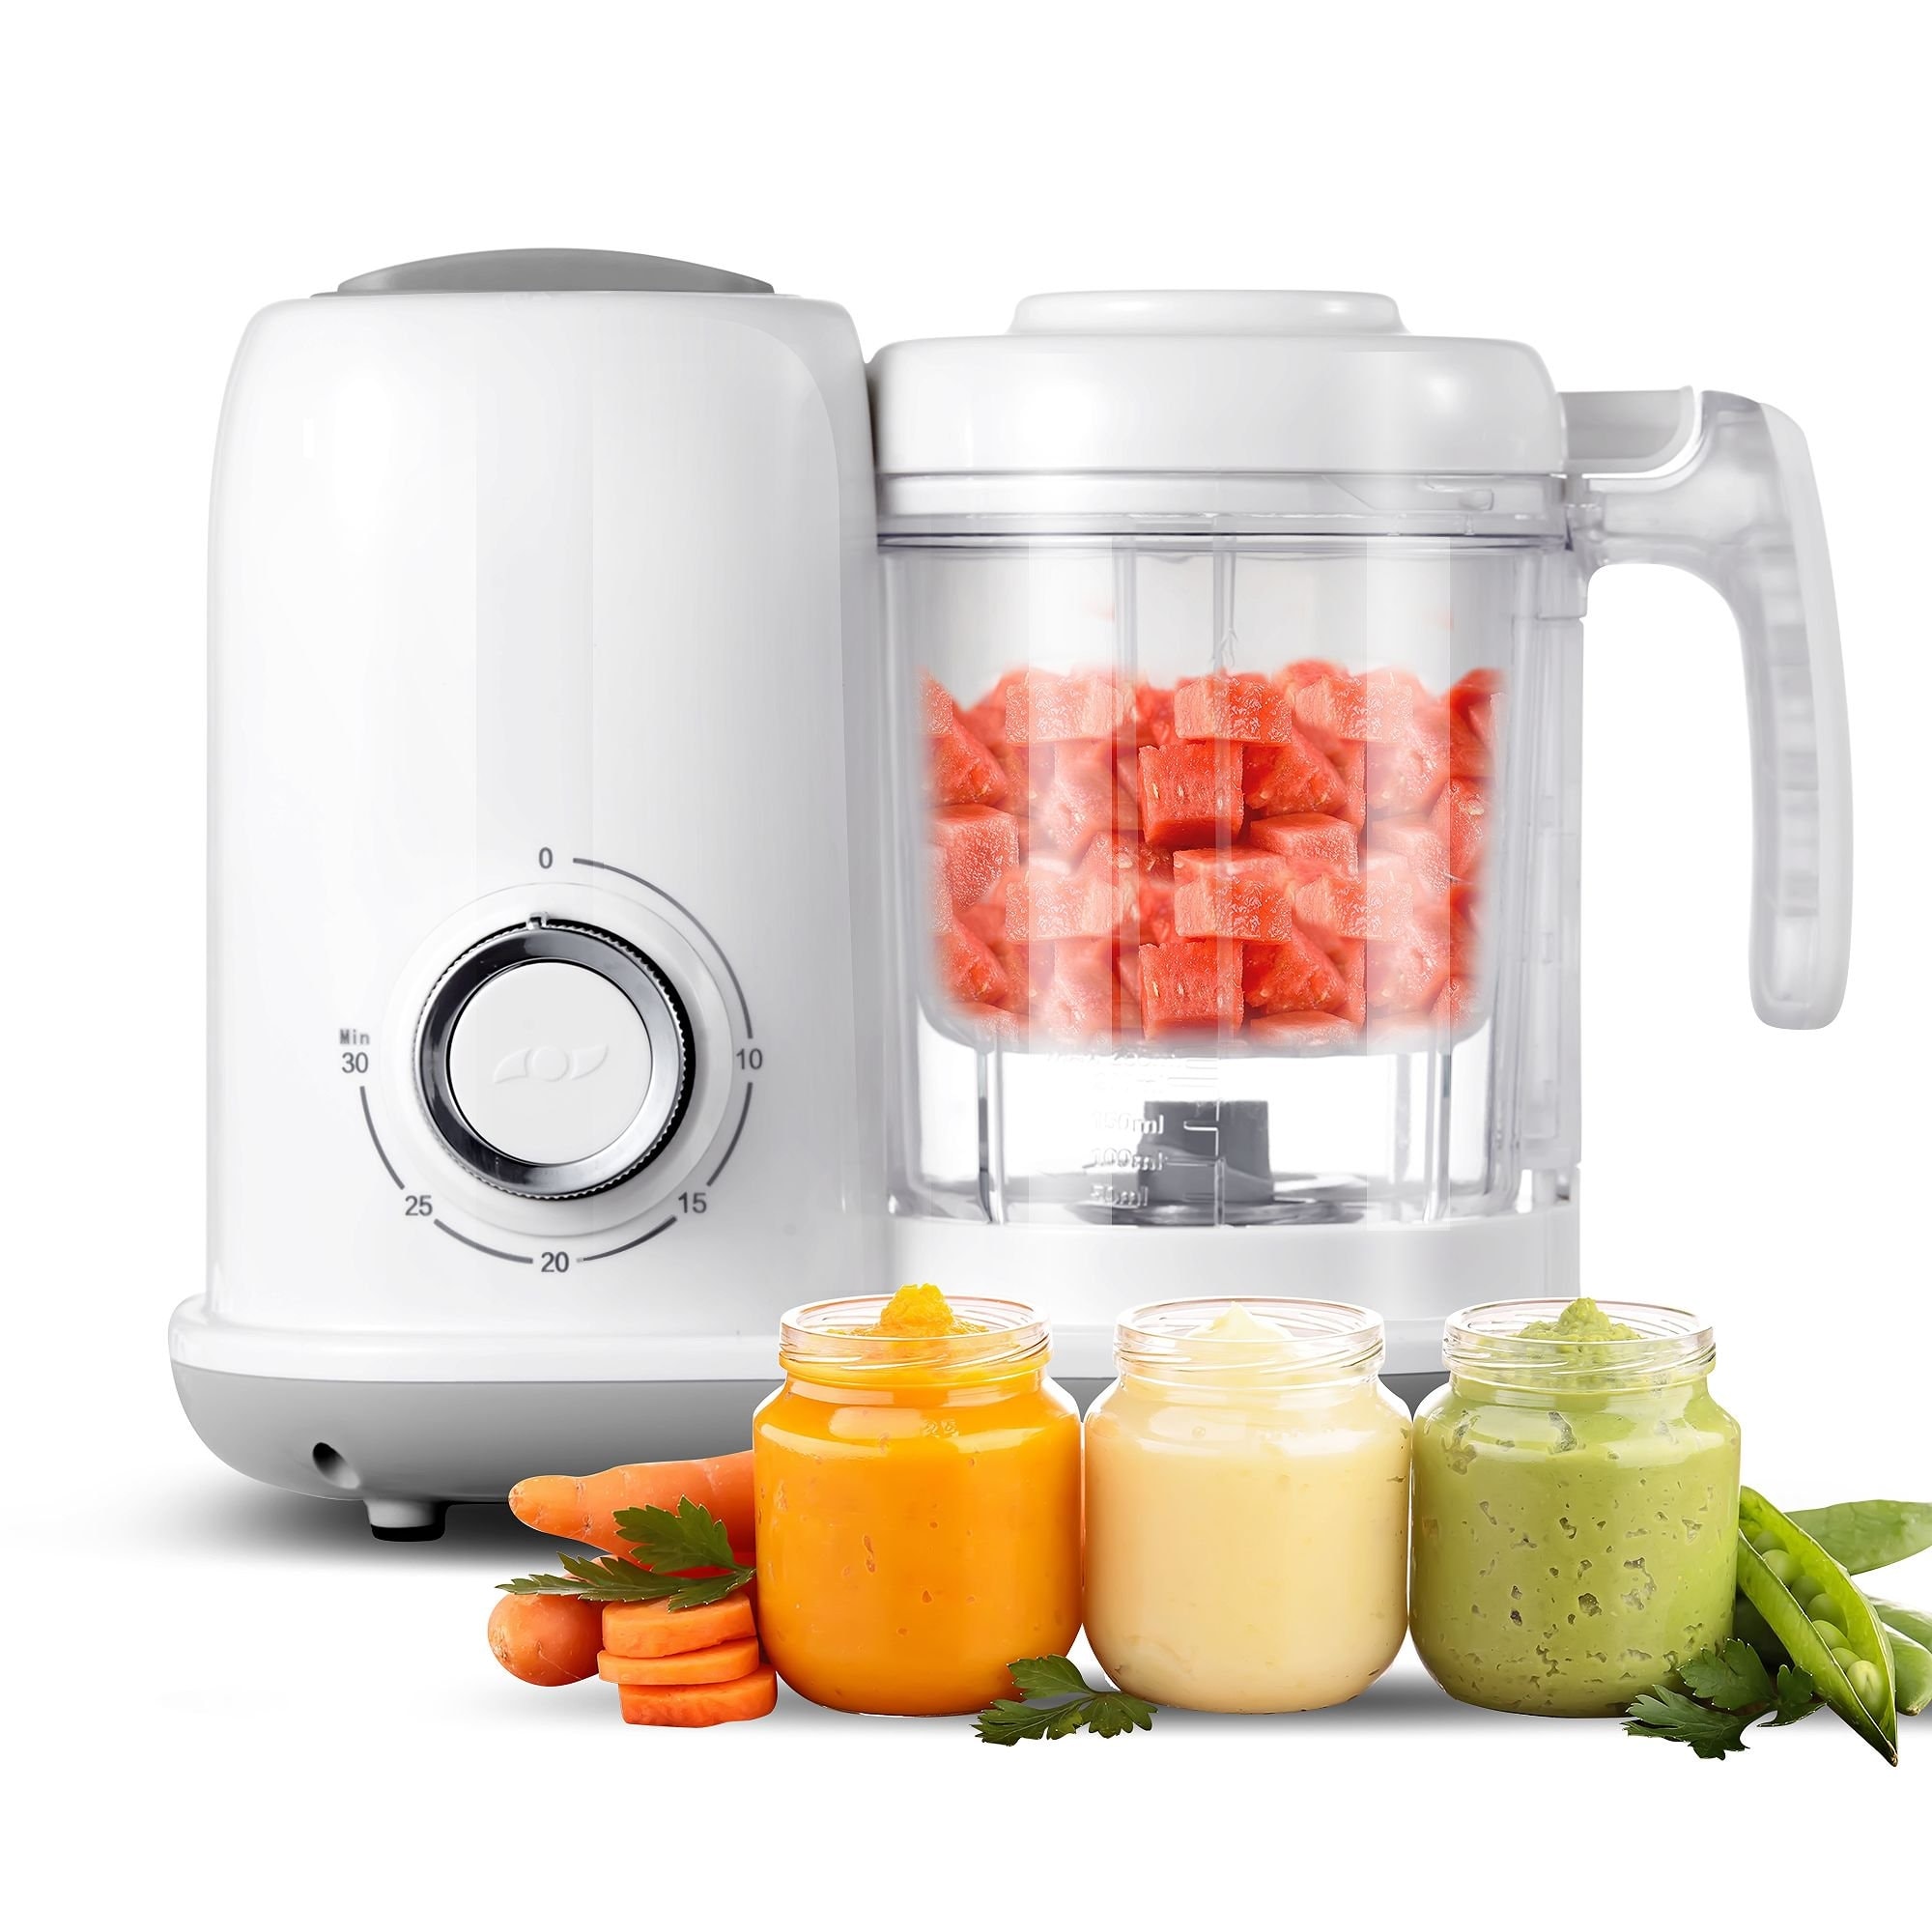 https://ak1.ostkcdn.com/images/products/is/images/direct/475788e74ee55c9bd60dadb11995c6db41b951ef/4-in-1-Mini-Baby-Food-Maker-Food-Processor-Blender-Cook-healthy-Toddler-Feeding.jpg